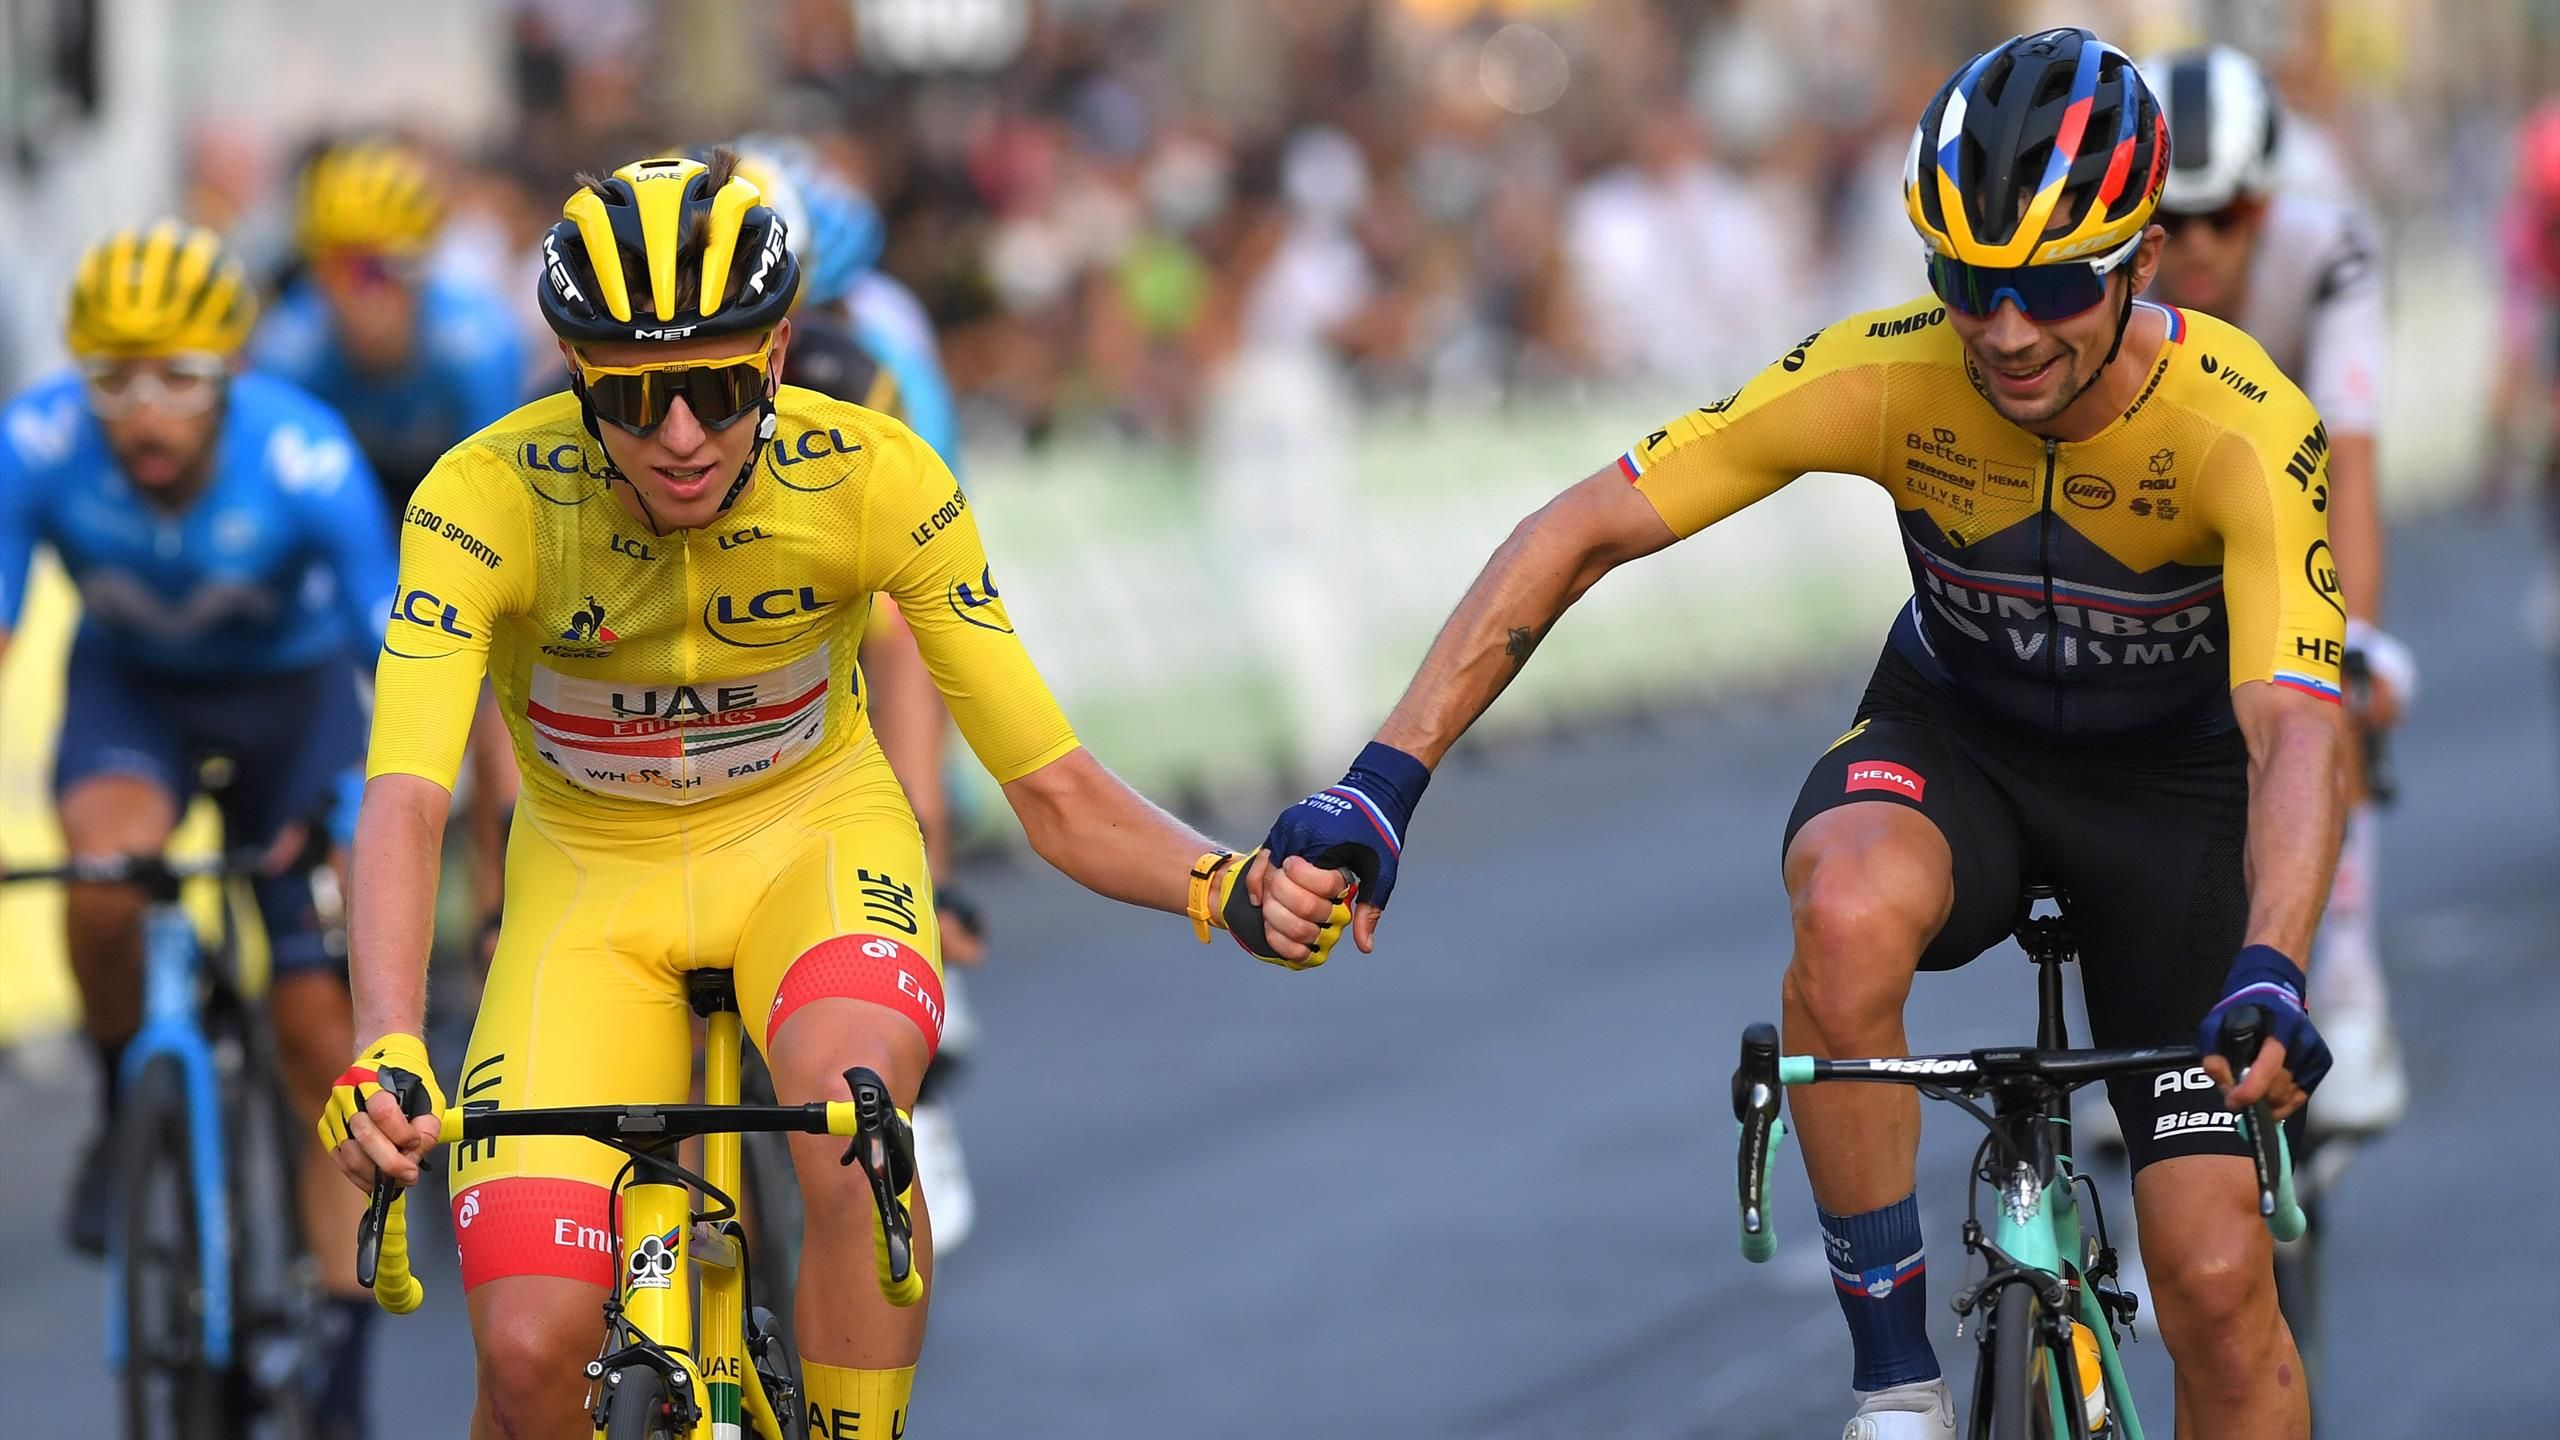 Tour de France 2021 - Stages, schedule, route map and key dates in the battle for yellow jersey